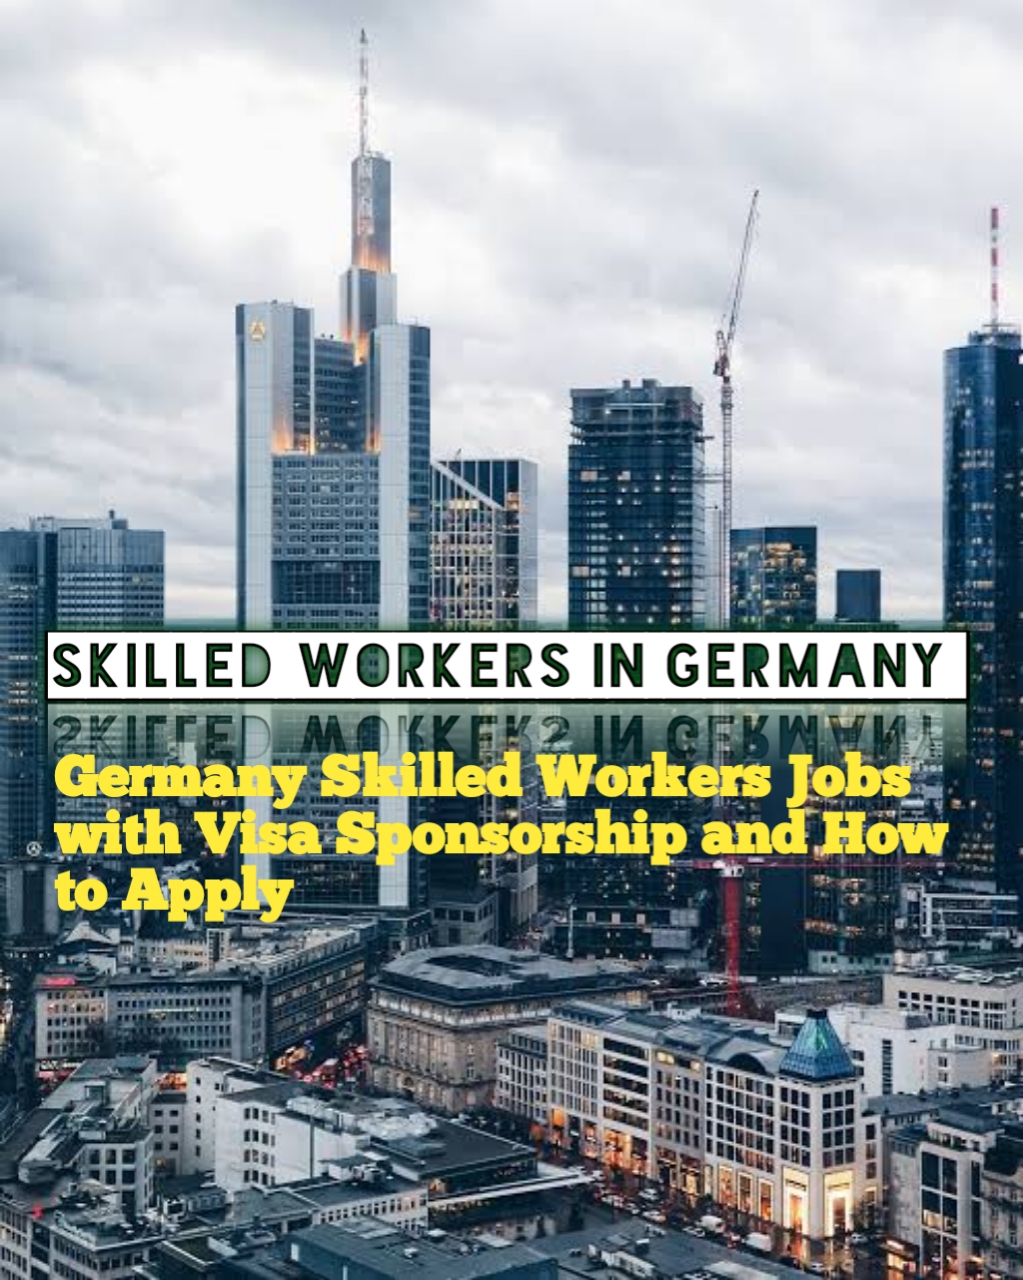 20221118 184150 - Germany Skilled Workers Jobs with Visa Sponsorship and How to Apply